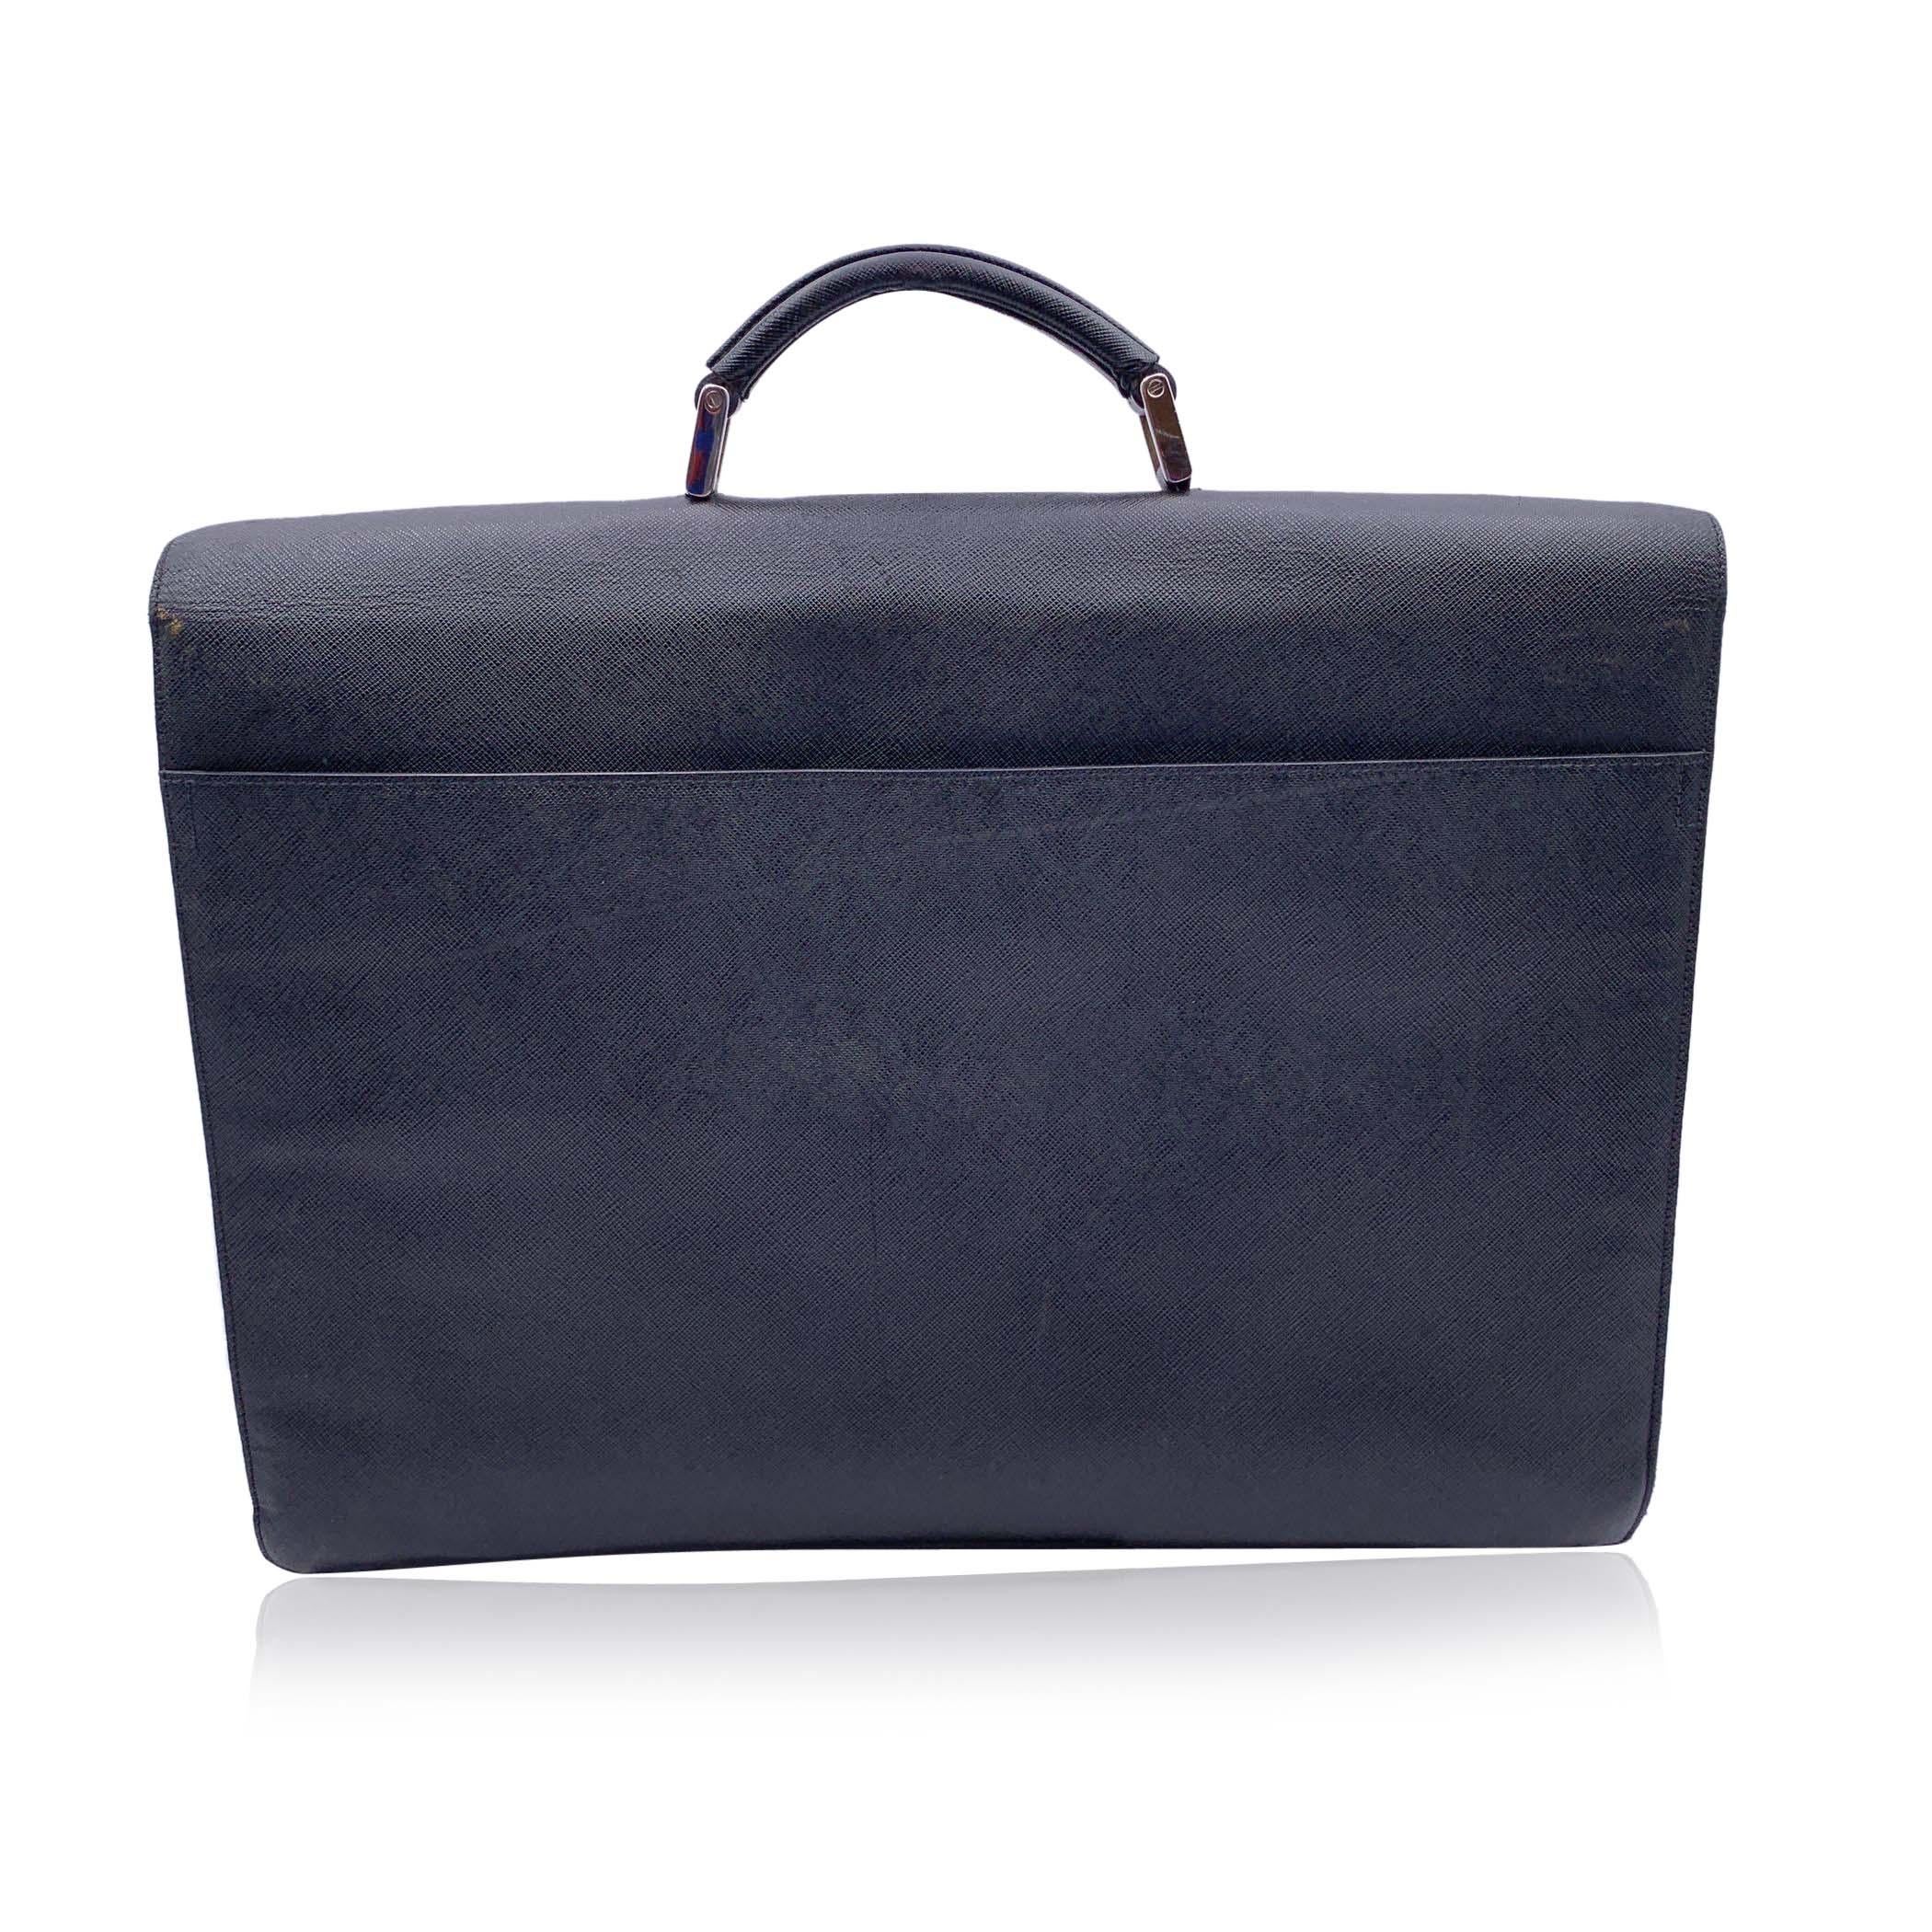 Prada Black Saffiano Leather 3 Gussets Briefcase Work Bag In Good Condition For Sale In Rome, Rome